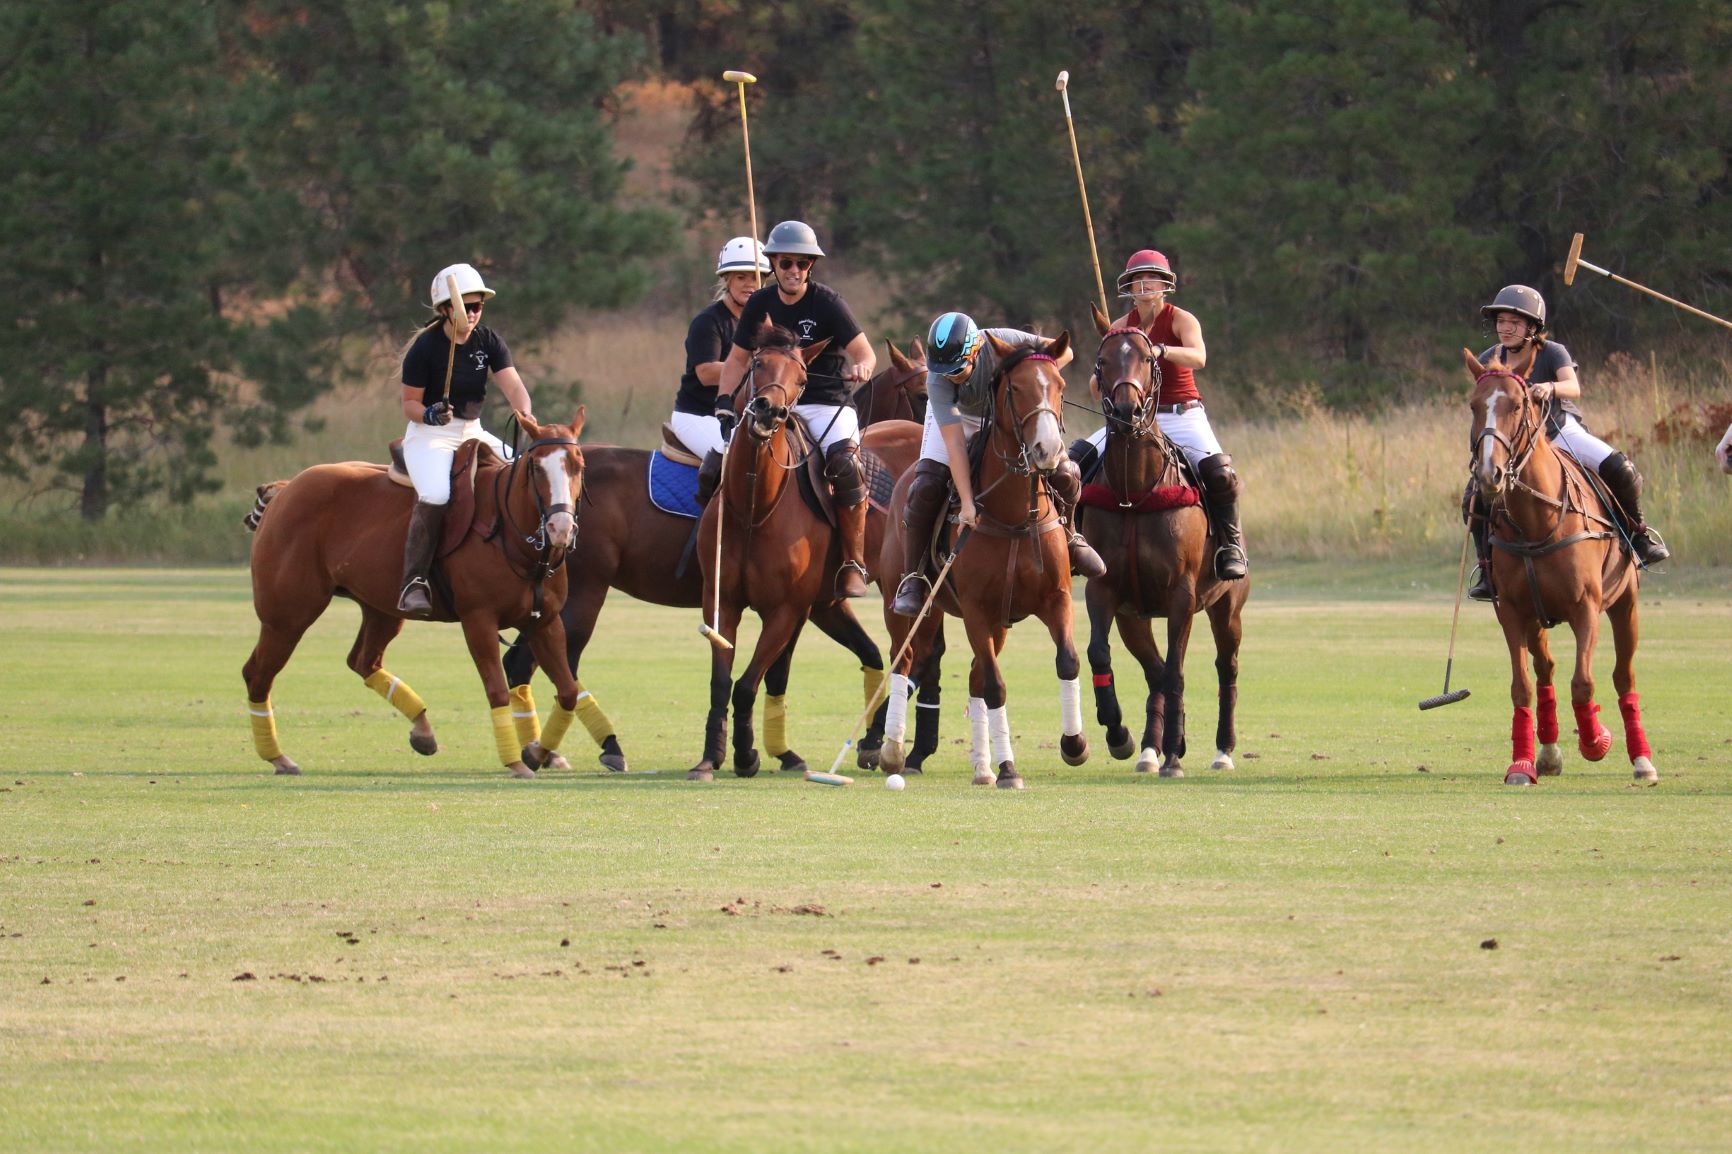 Polo players riding brown horses, wearing helmets, and carrying polo sticks.